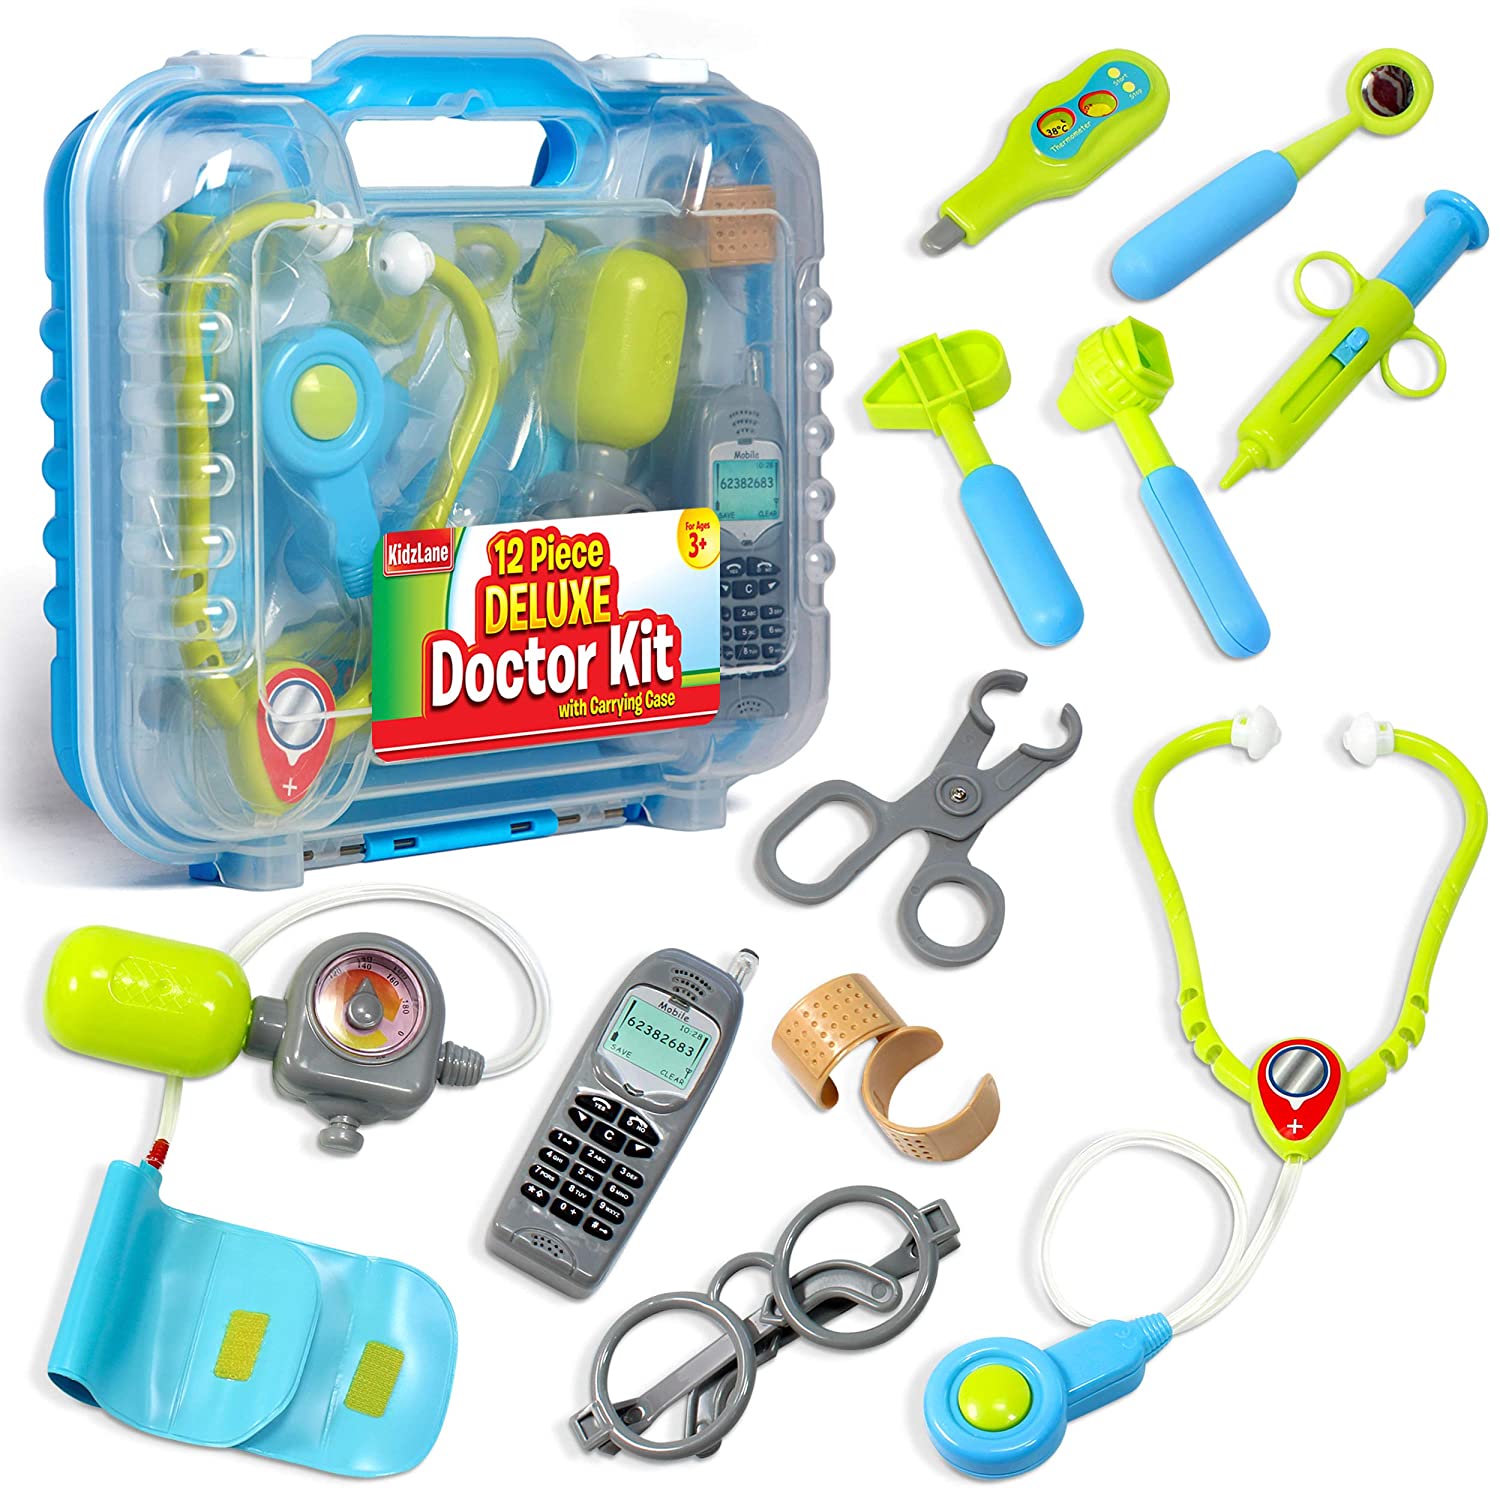 Top 9 Best Toy Doctor Kits Reviews in 2022 1